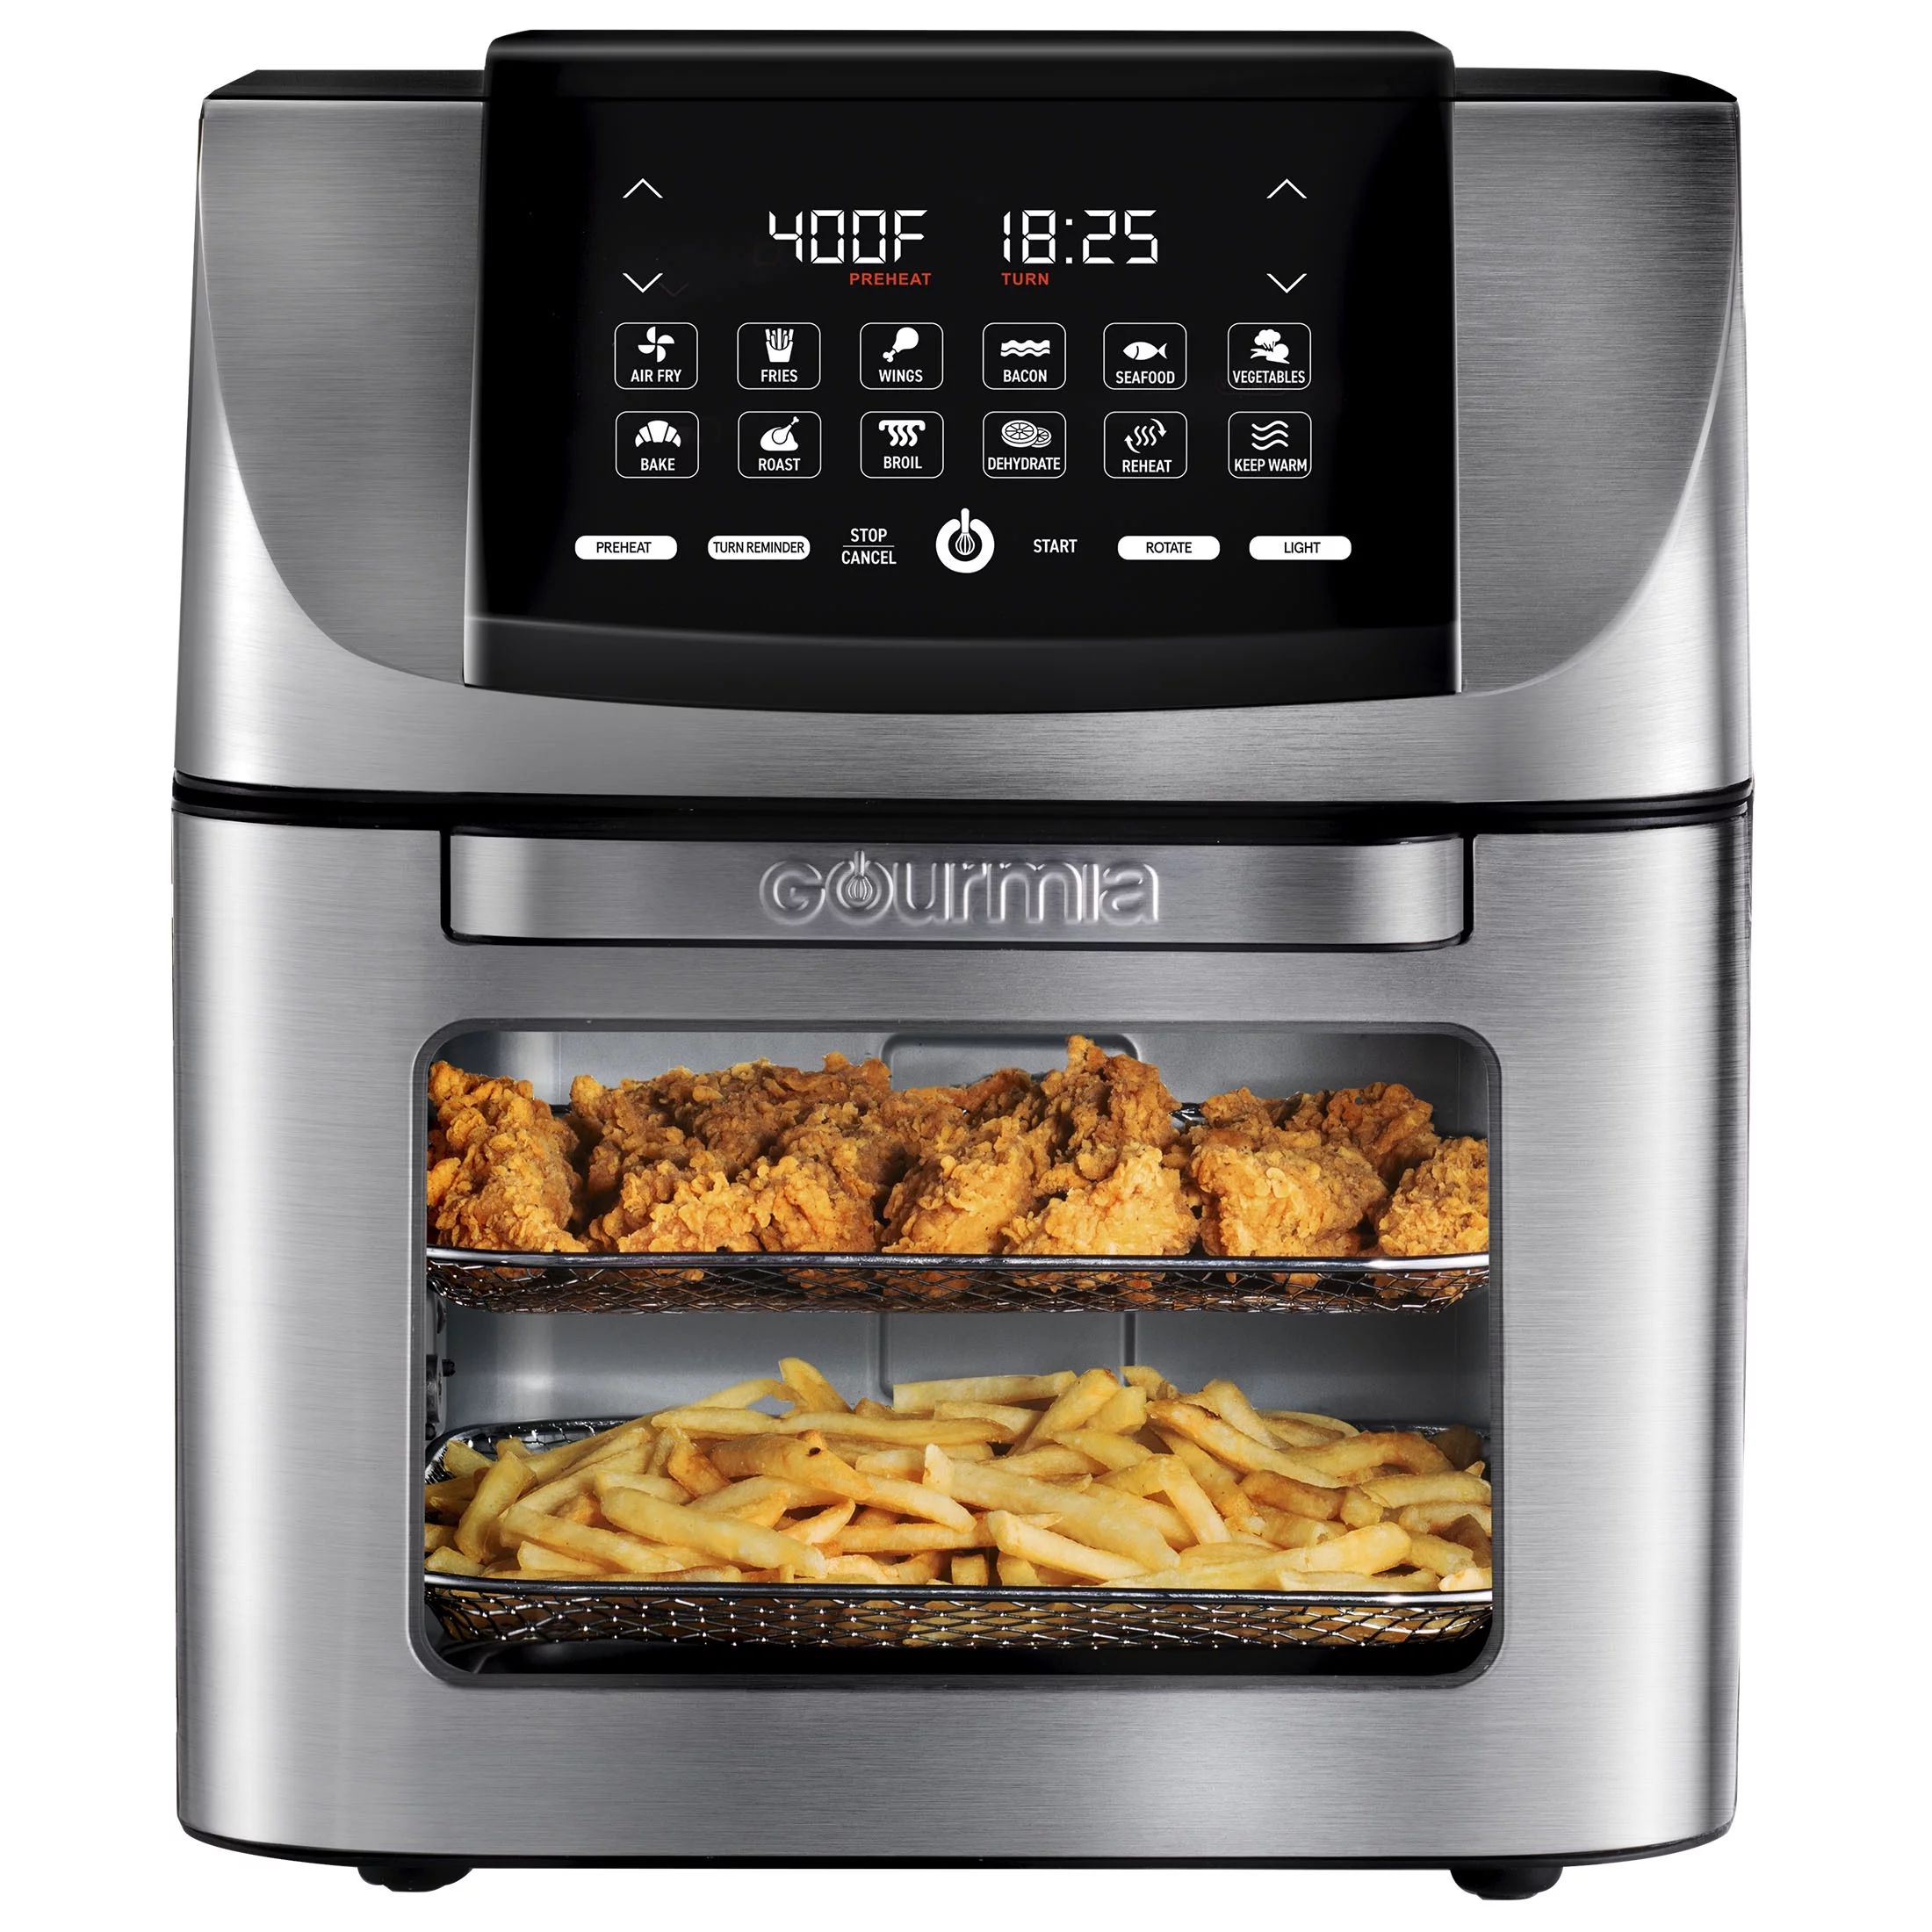 Gourmia All-in-One 14 QT Air Fryer, Oven, Rotisserie, Dehydrator with 12 Cooking Functions | Walmart (US)